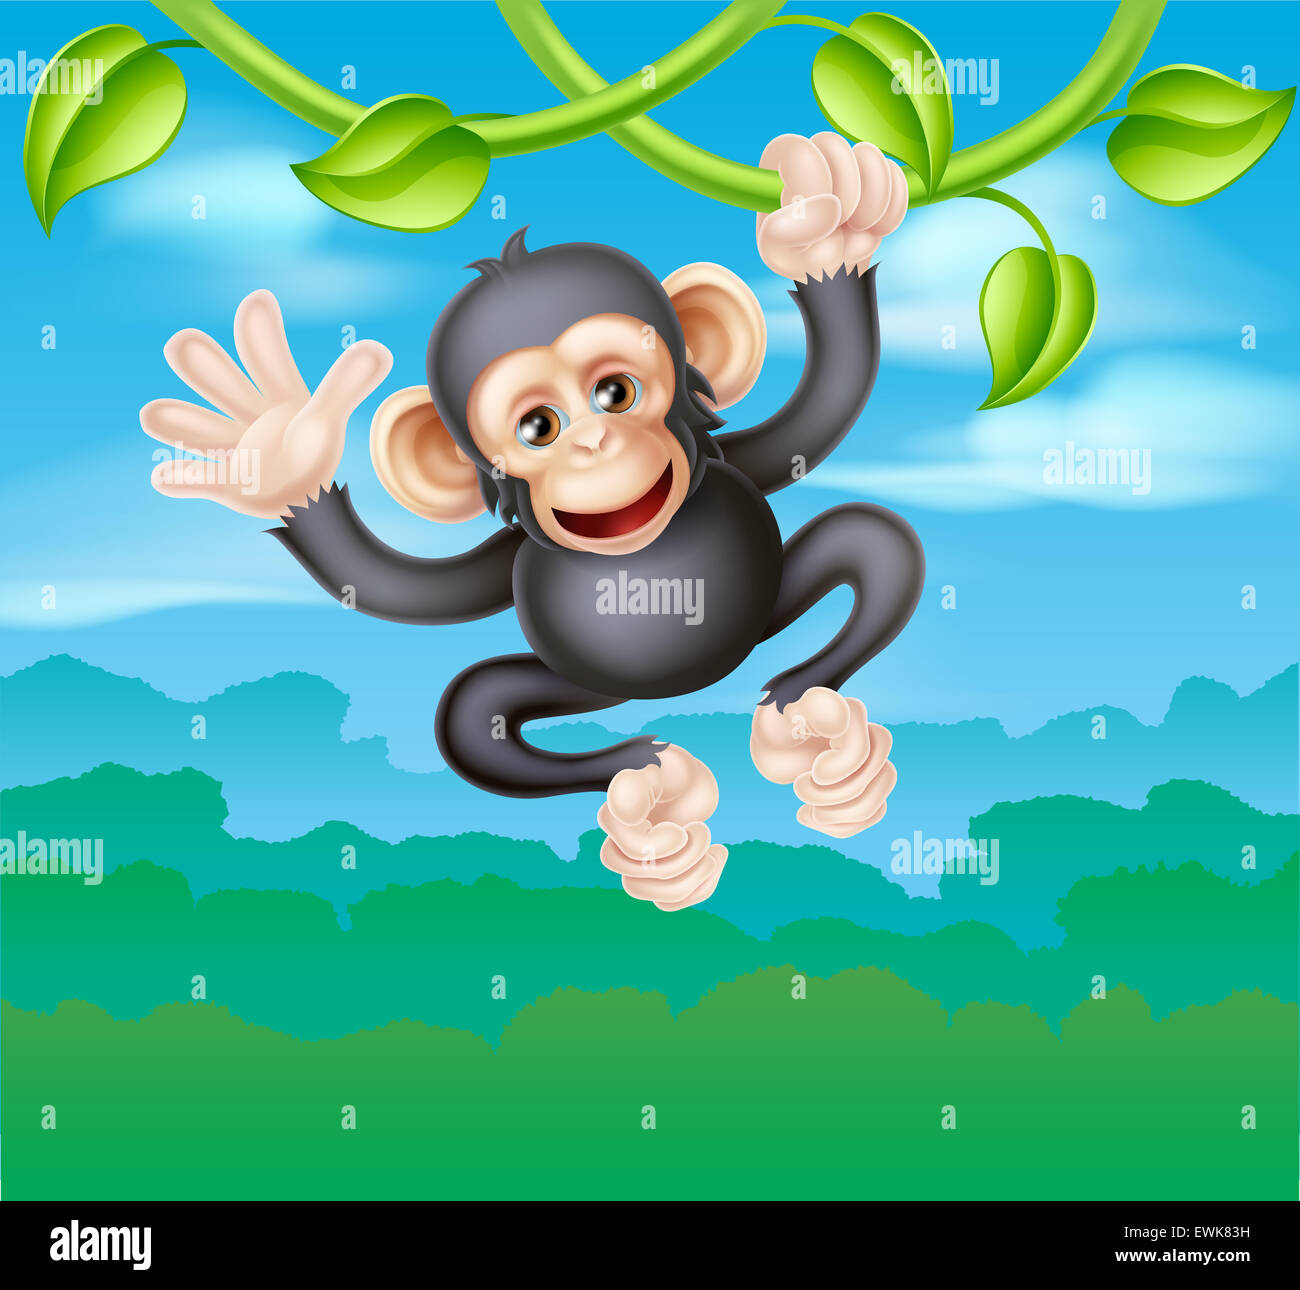 A cute cartoon chimp primate, similar in appearance to a monkey, character swinging from vines in the trees of a jungle and wavi Stock Photo